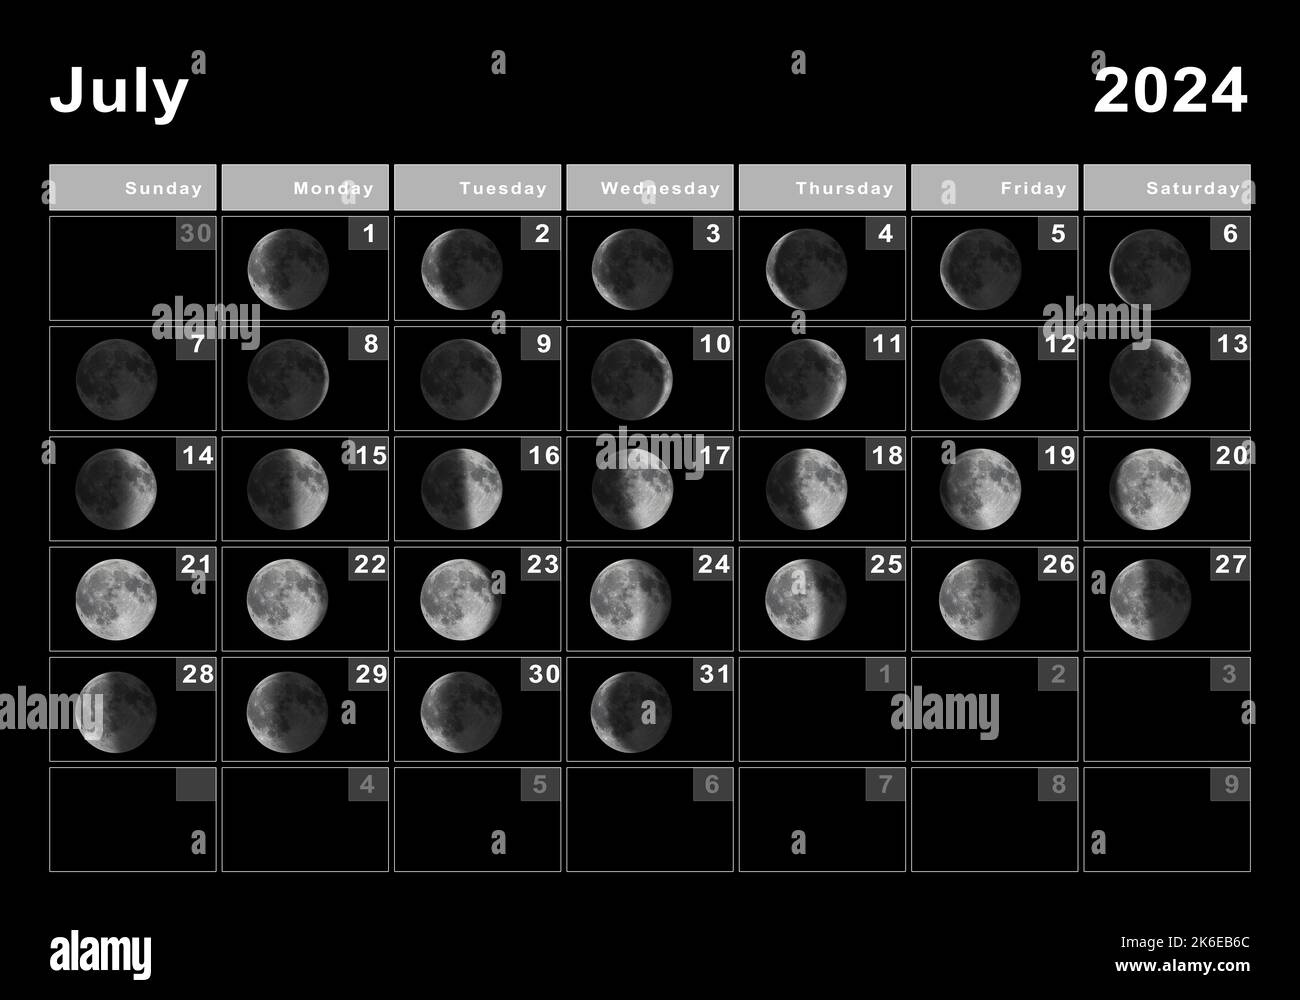 July 2024 Lunar Calendar, Moon Cycles, Moon Phases Stock Photo - Alamy within Calendar Moon July 2024